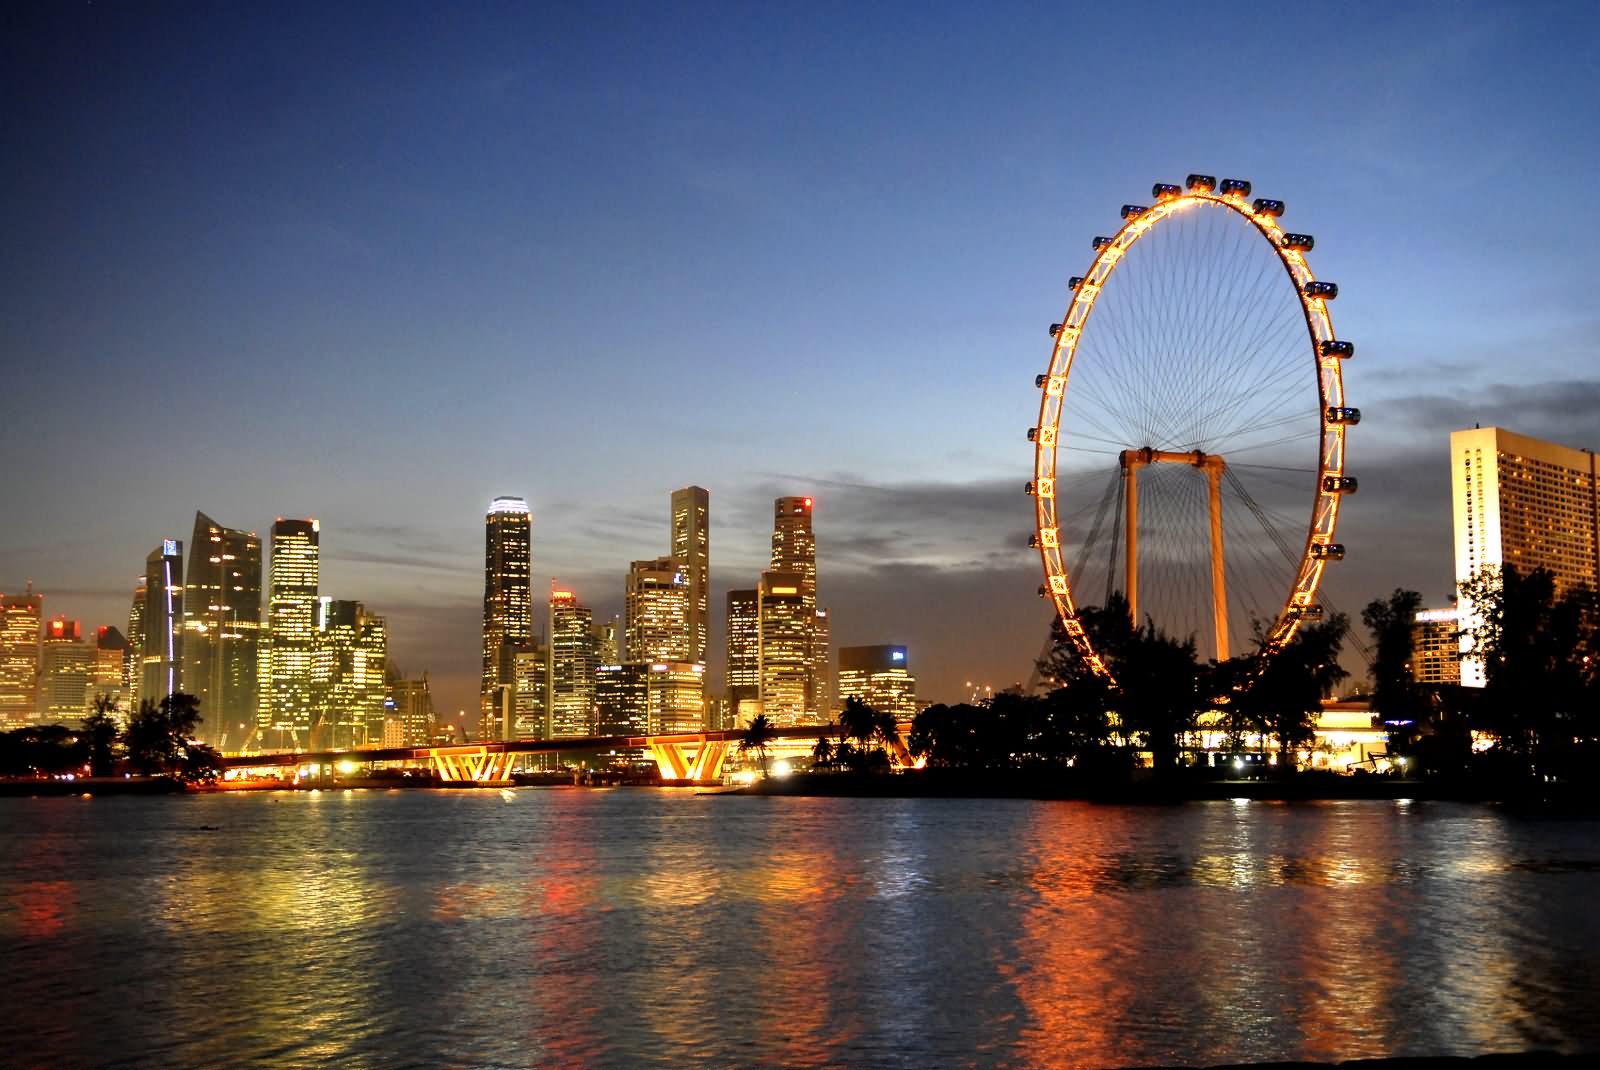 31 Most Beautiful Singapore Flyer Night Picture And Photos